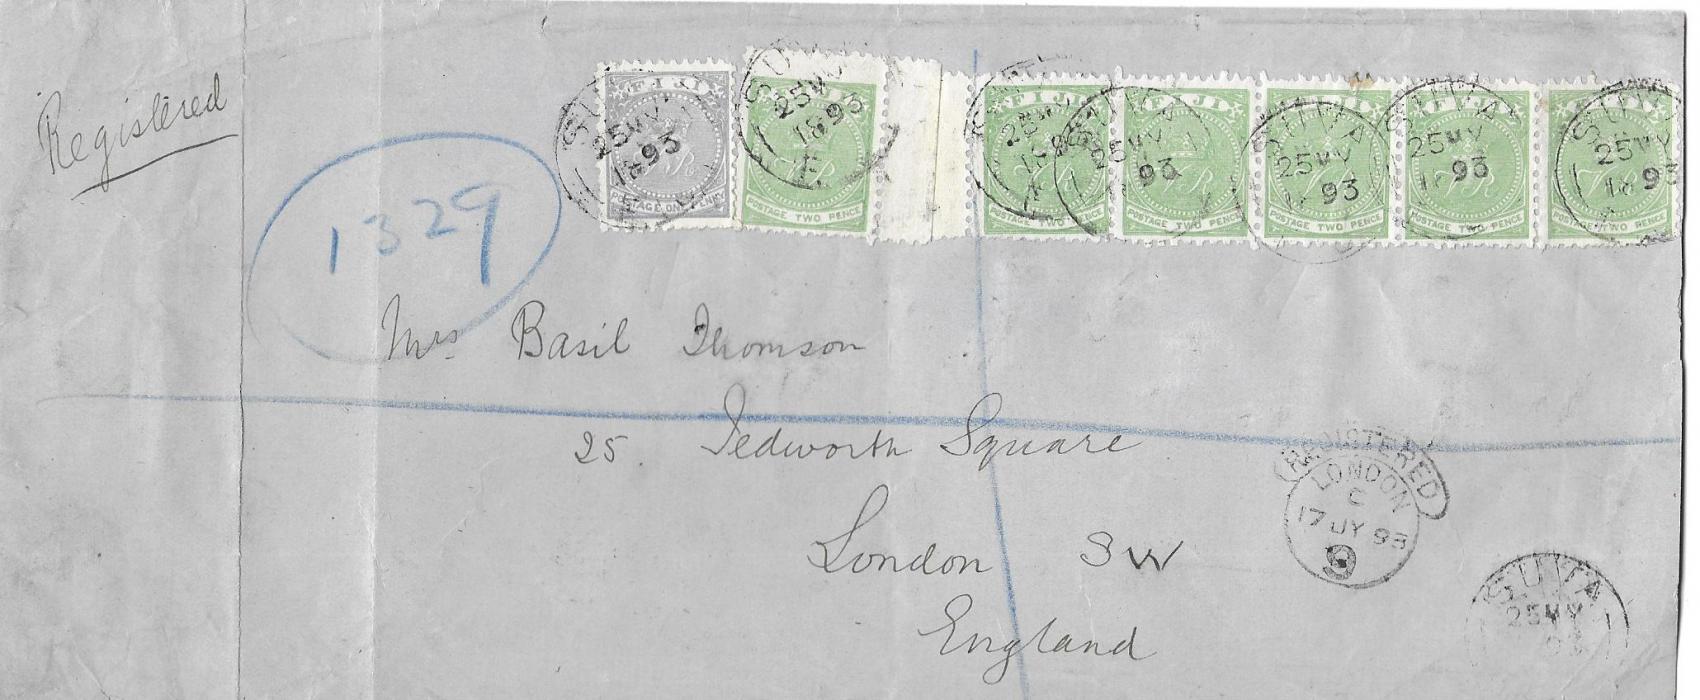 Fiji 1893 (25 MY)  long registered cover to London, from Basil Thomson, author of “The Decay of custom in Fiji” to his wife, franked at 1/1d. rate with 2d. single (position 10, type 2), 2d. strip of five (positions 11-15) and 1d. single (position 48, substituted cliché), arrival backstamp.